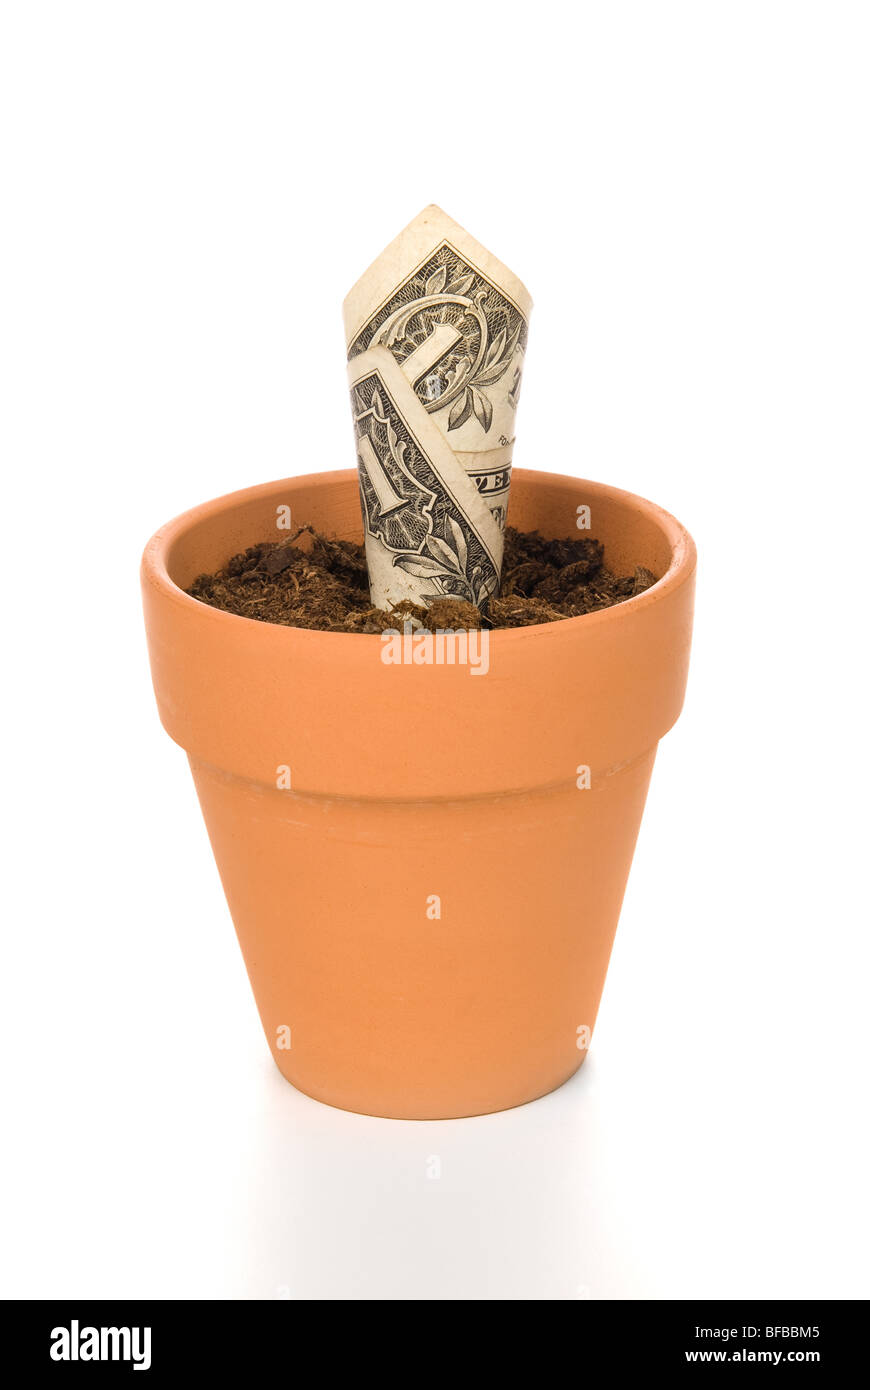 A clay flower pot with a newly blooming cash flower. Good image for investment, retirement, savings inferences. Stock Photo